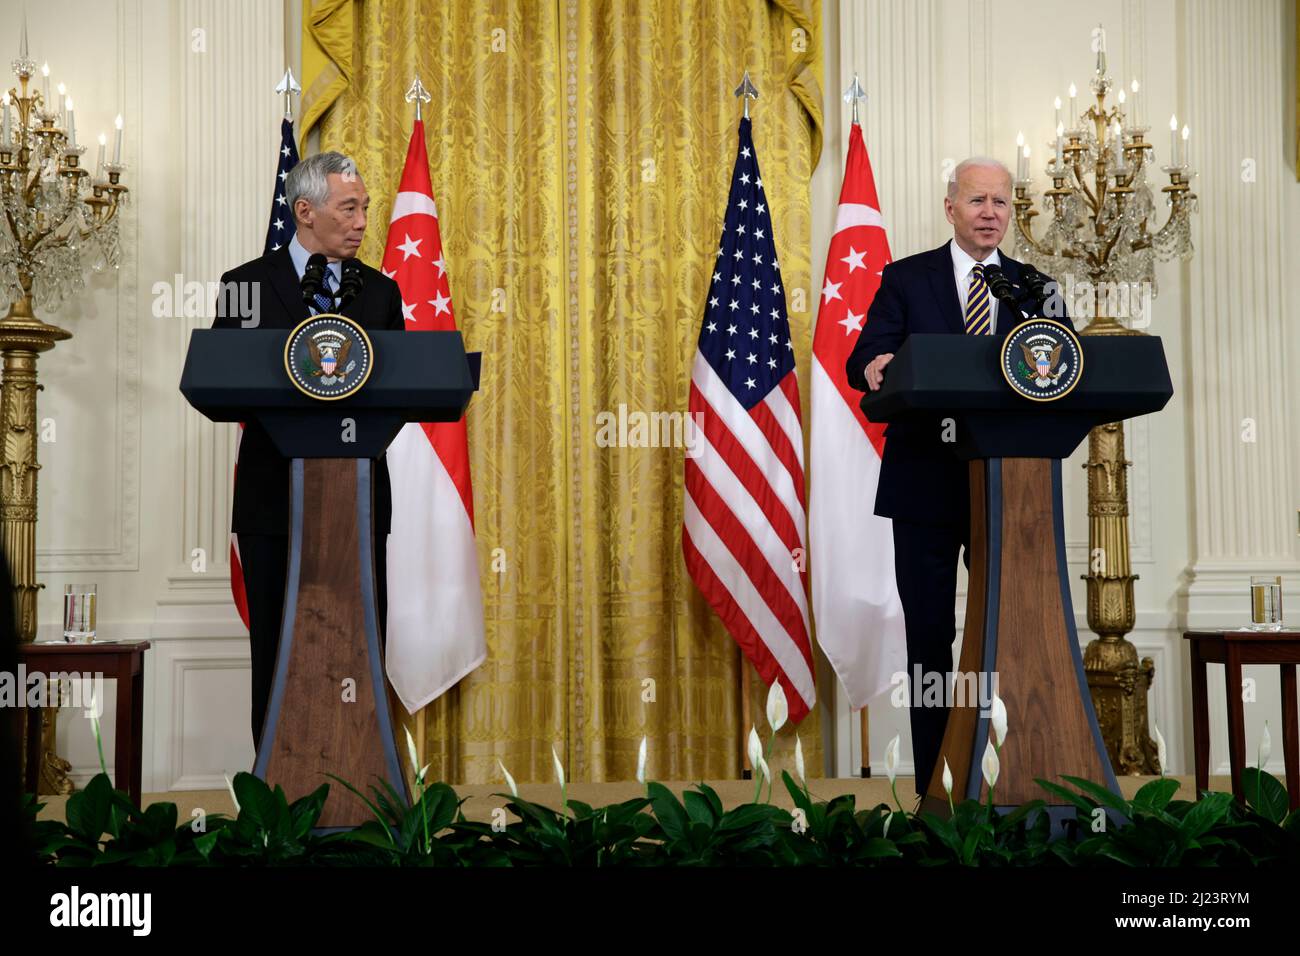 Washington, DC, USA. 29th Mar, 2022. U.S. President Joe Biden speaks during a joint statement with Lee Hsien Loong, Singapore's prime minister, left, in the East Room of the White House in Washington, DC, U.S., on Tuesday, March 29, 2022. Biden thanked Lee Hsien Loong for supporting Ukraine during a meeting this morning and said the two leaders would discuss U.S. strategy in the Indo-Pacific region. Credit: Samuel Corum/Pool via CNP/dpa/Alamy Live News Stock Photo